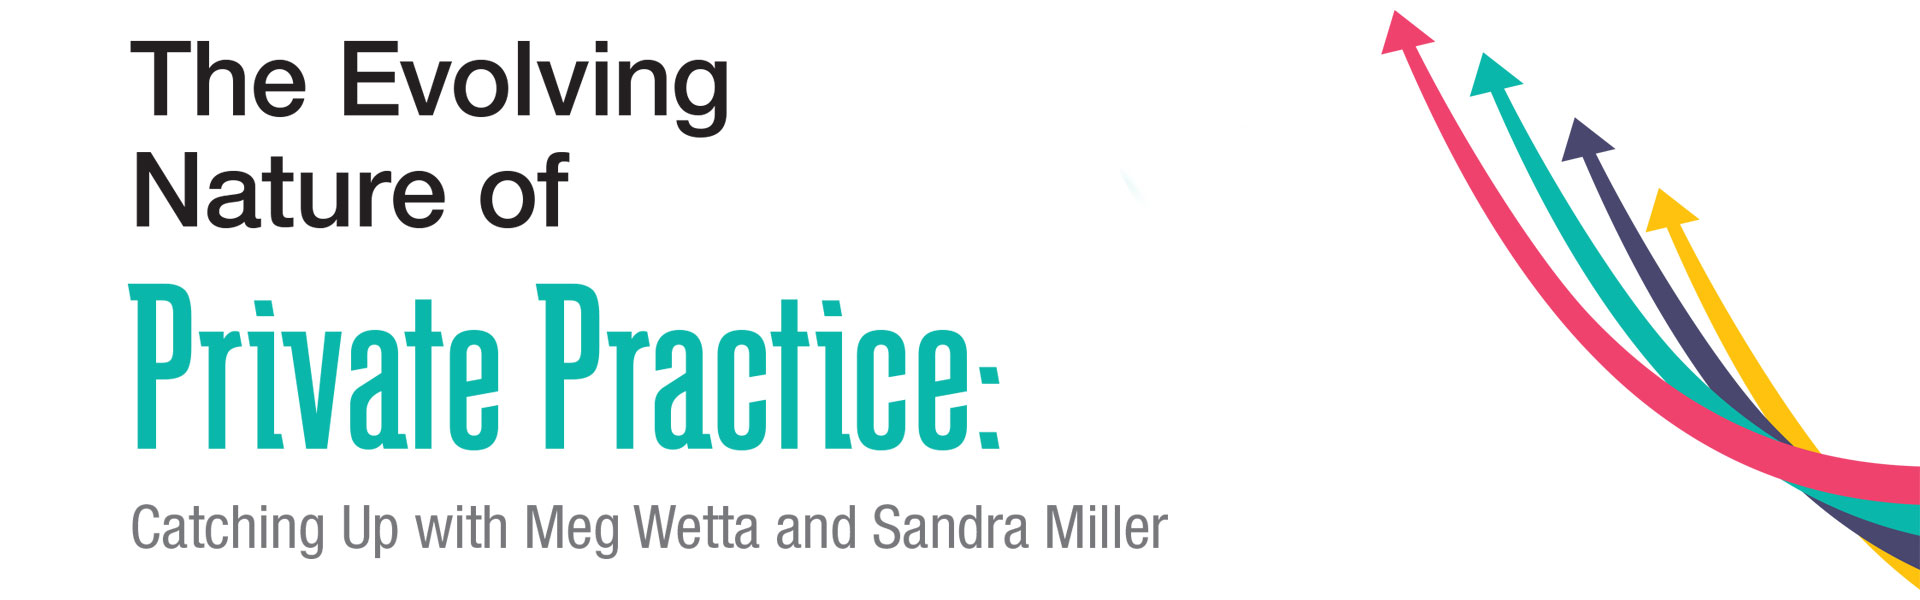 The Evolving Nature of Private Practice: Catching Up with Meg Wetta and Sandra Miller